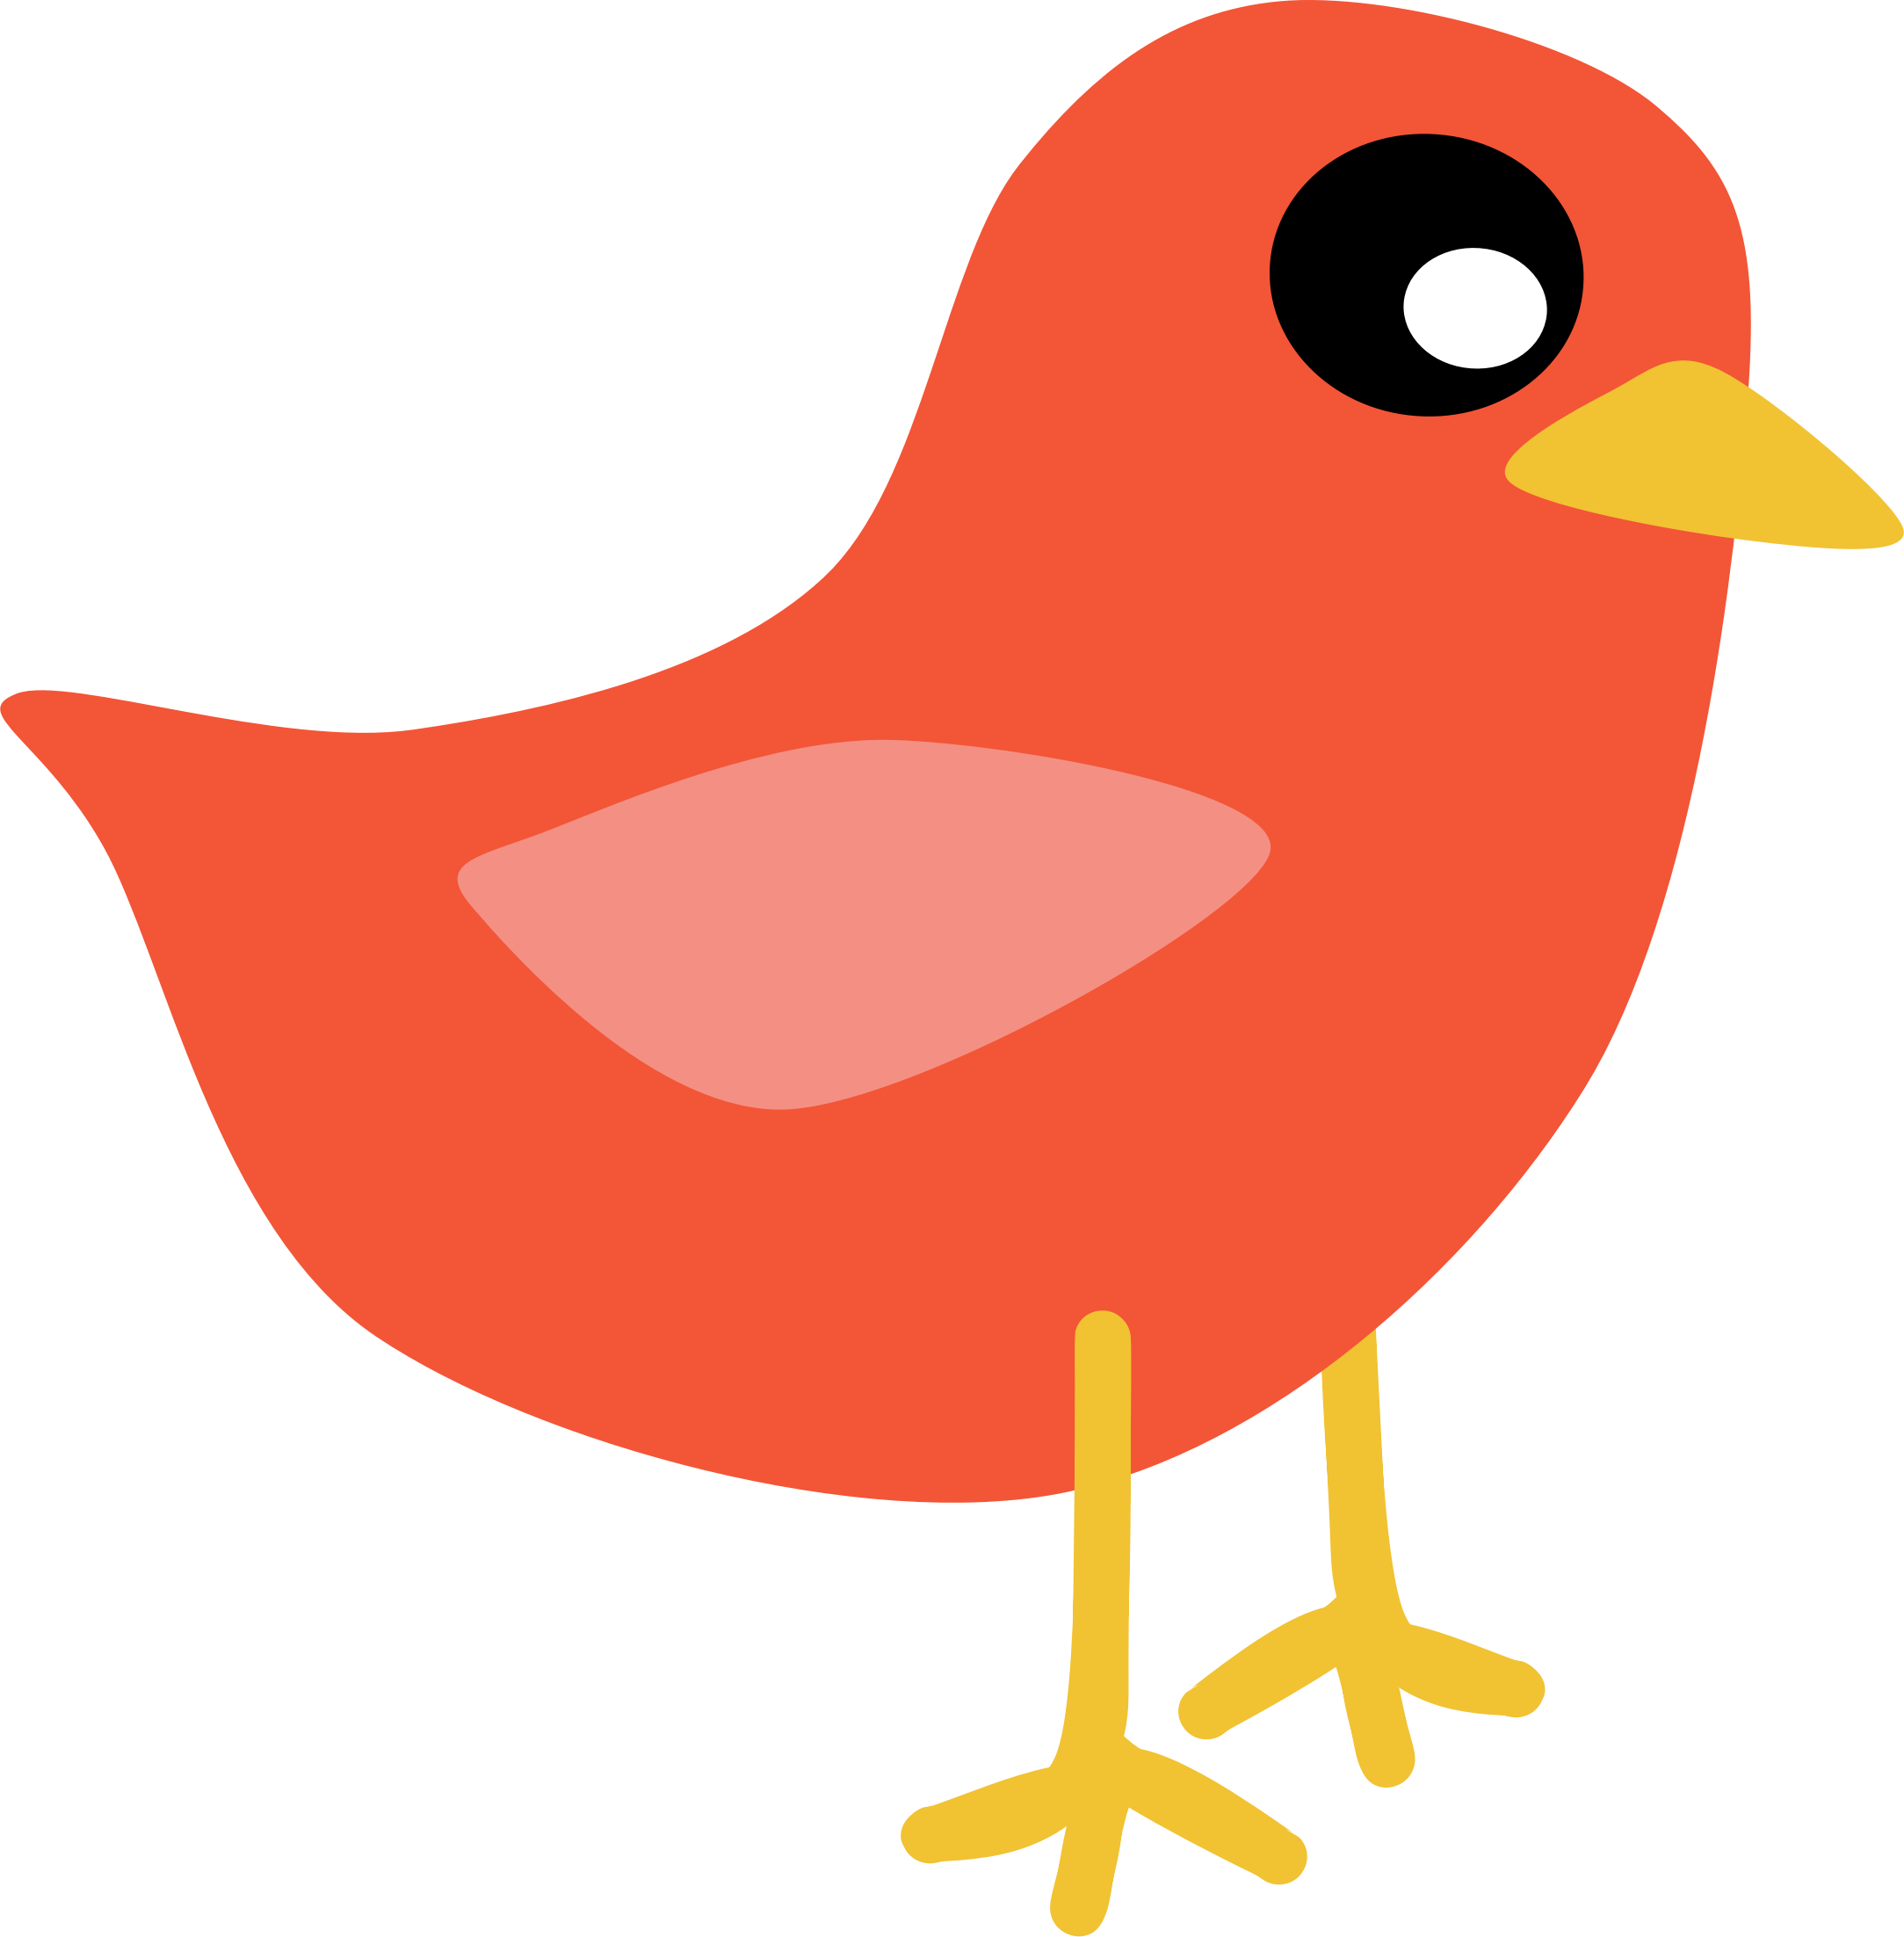 Spring birds clipart free clipart images 2.